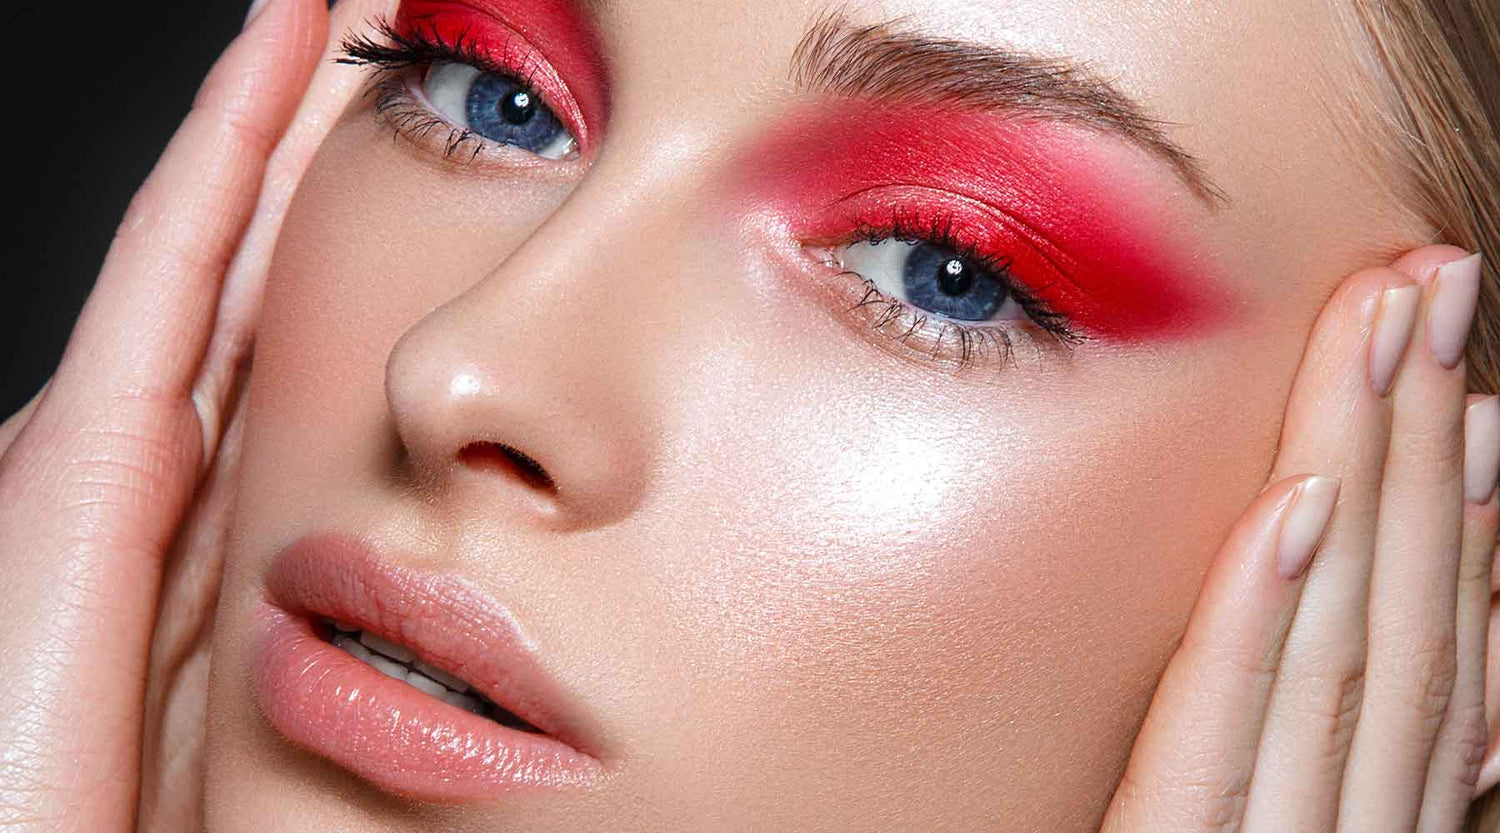 Model with red eyeshadow, glowing makeup and soft nude lip colour